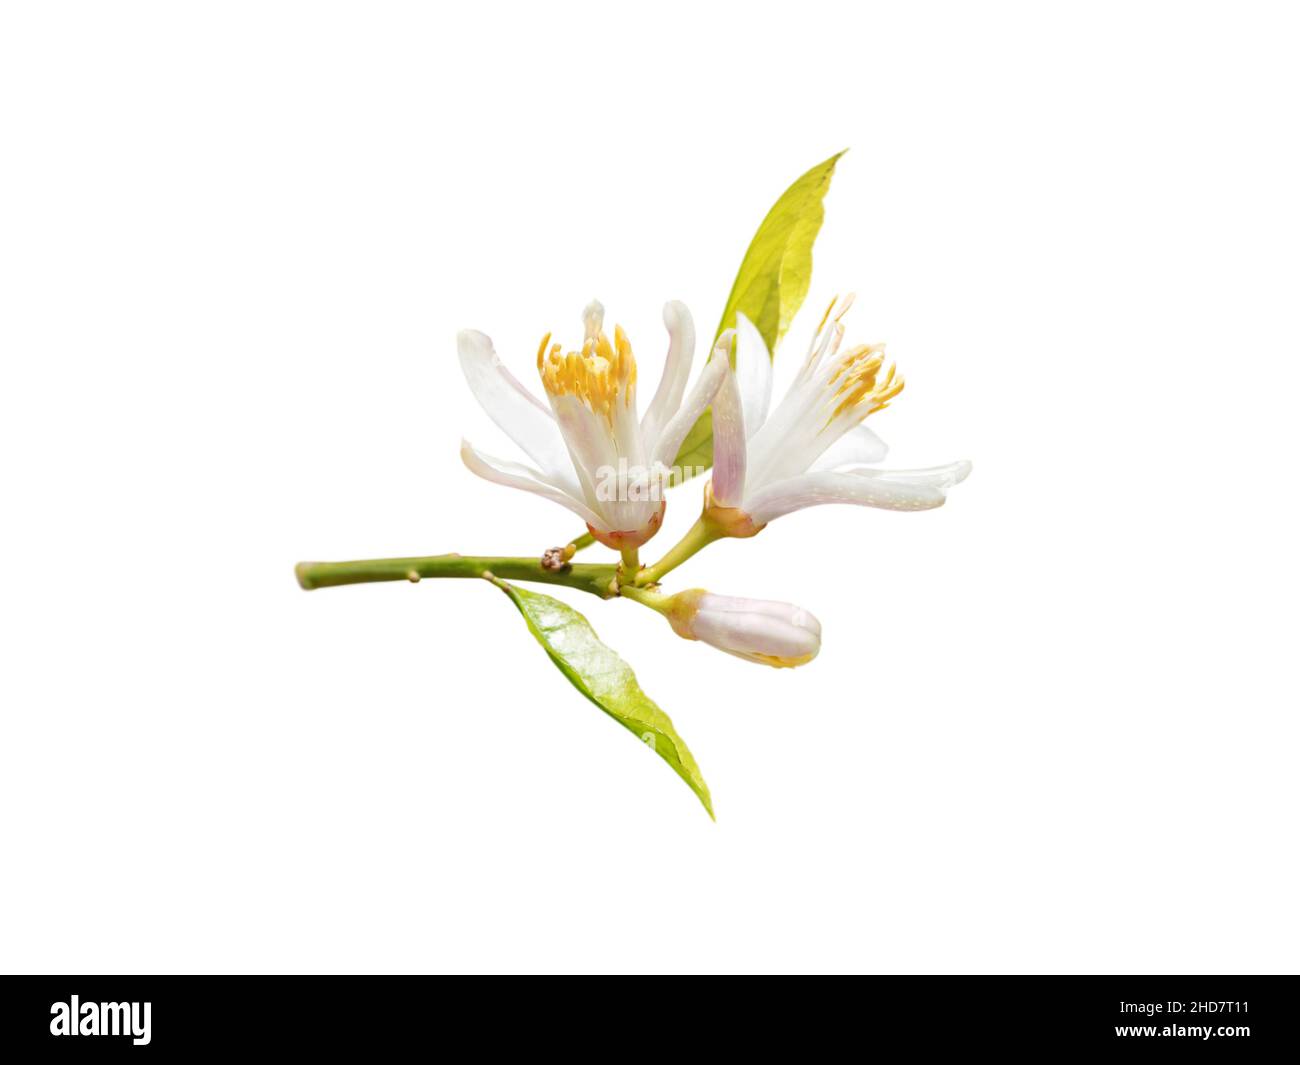 Lemon tree branch with white flowers, buds and leaves isolated on white. Neroli blossom. Citrus bloom. Stock Photo